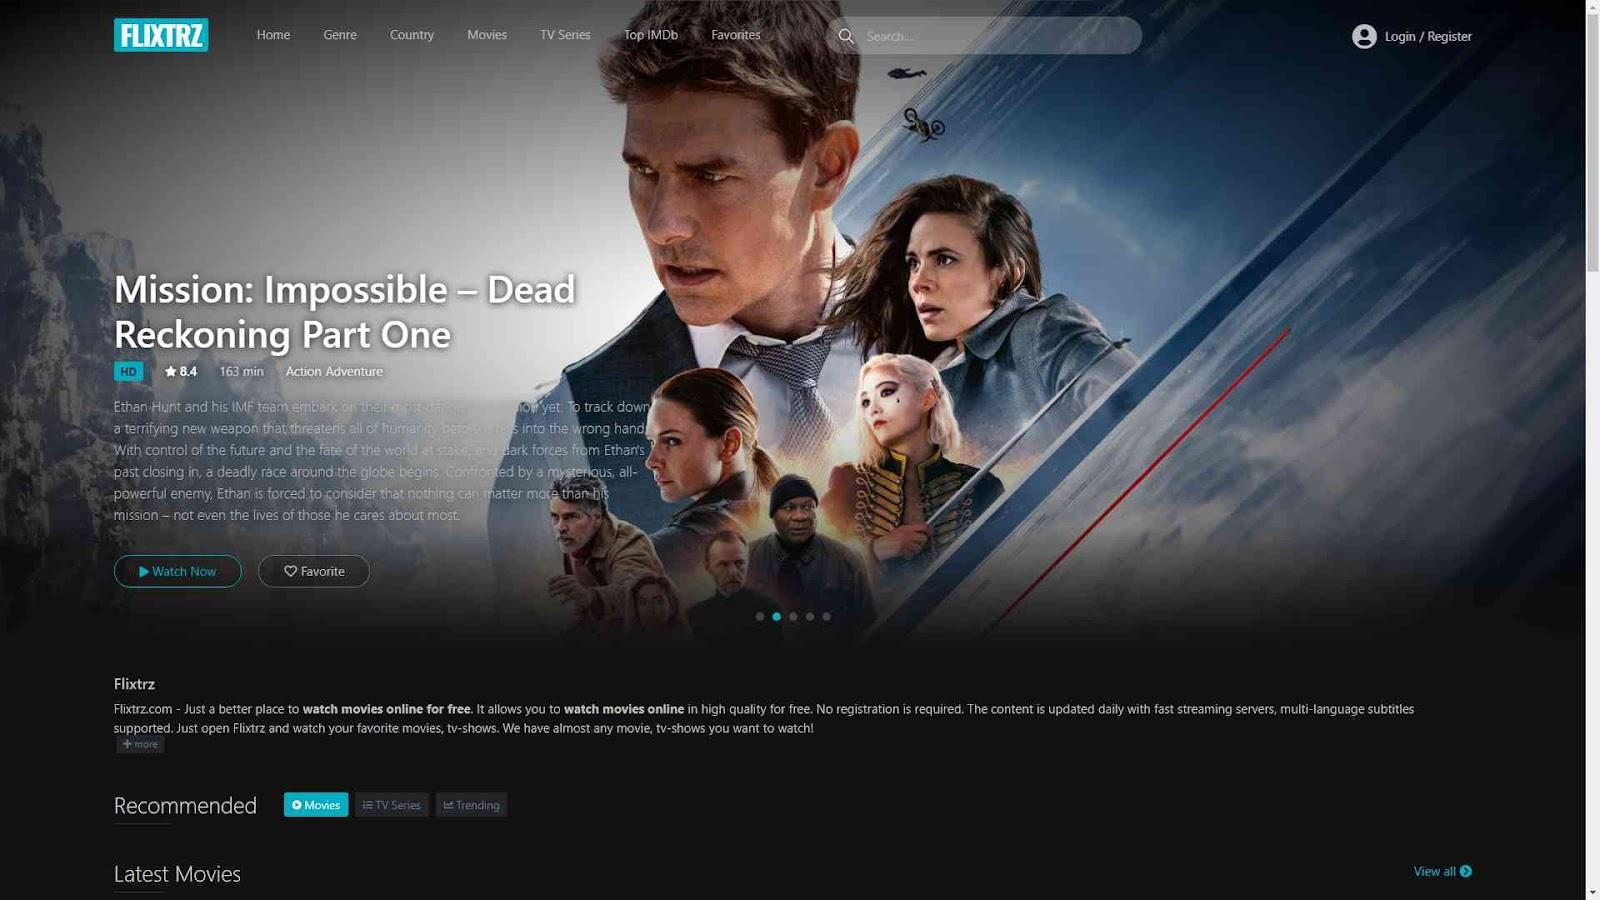 The Depths streaming: where to watch movie online?